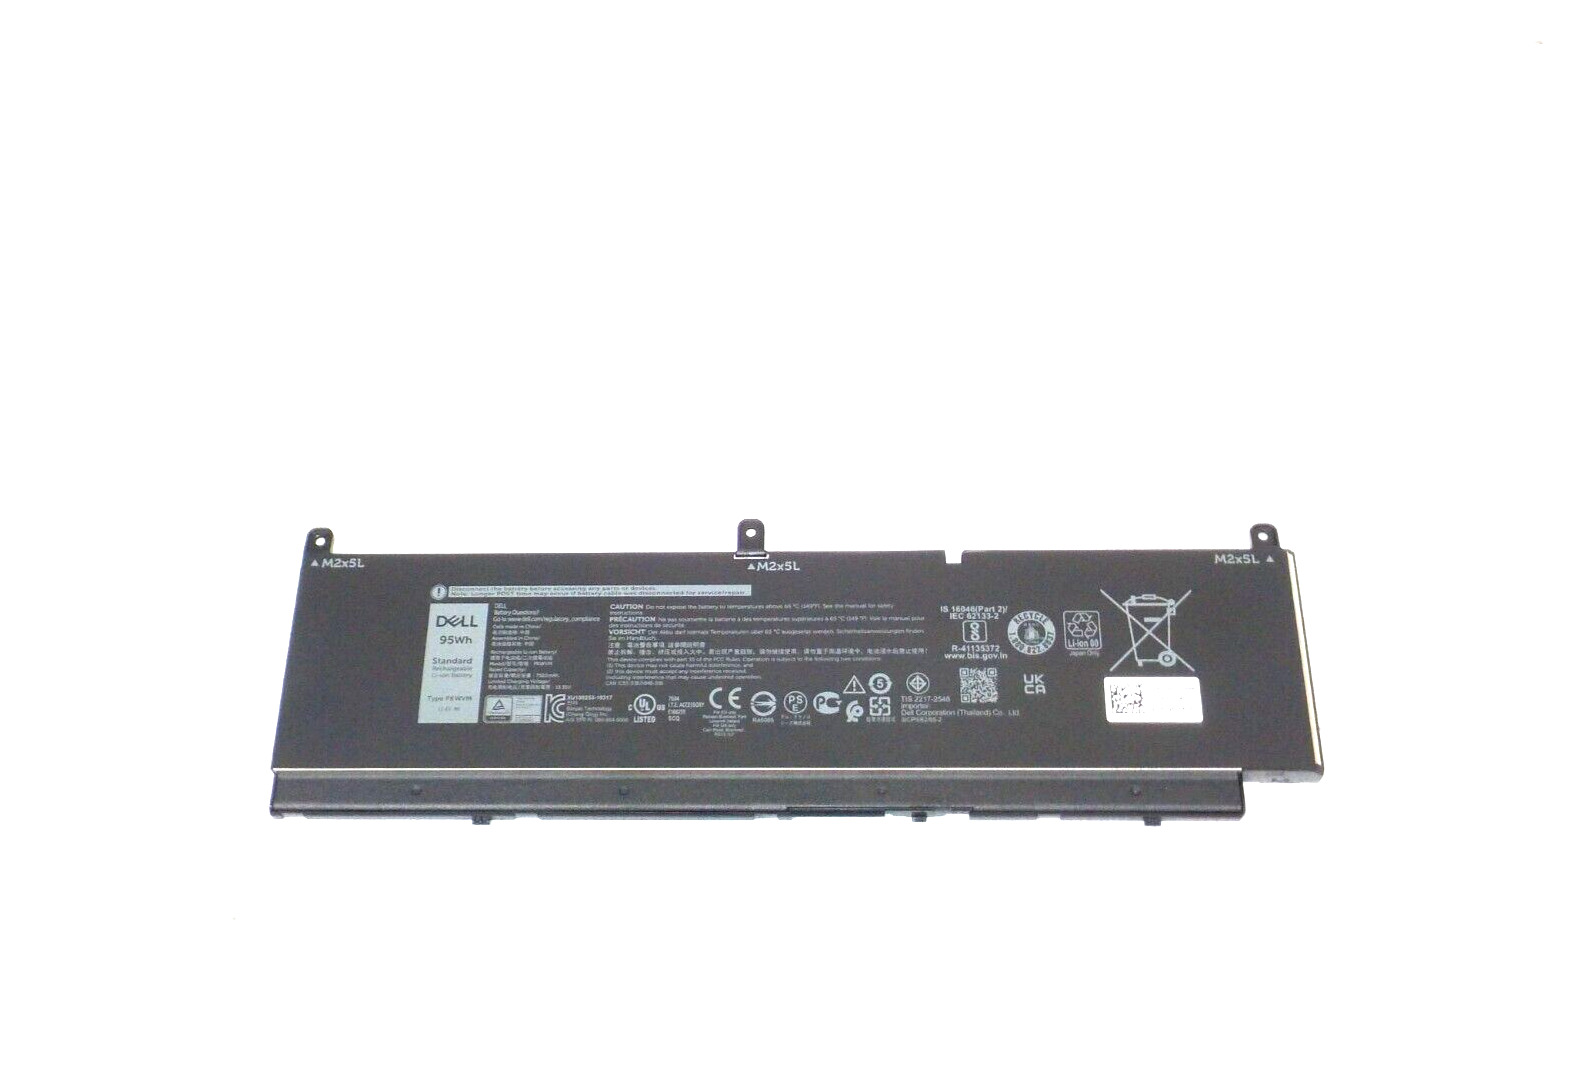 NEW Dell OEM Precision 7550 7750 7560 7760 6-Cell 95Wh Laptop Battery - PKWVM